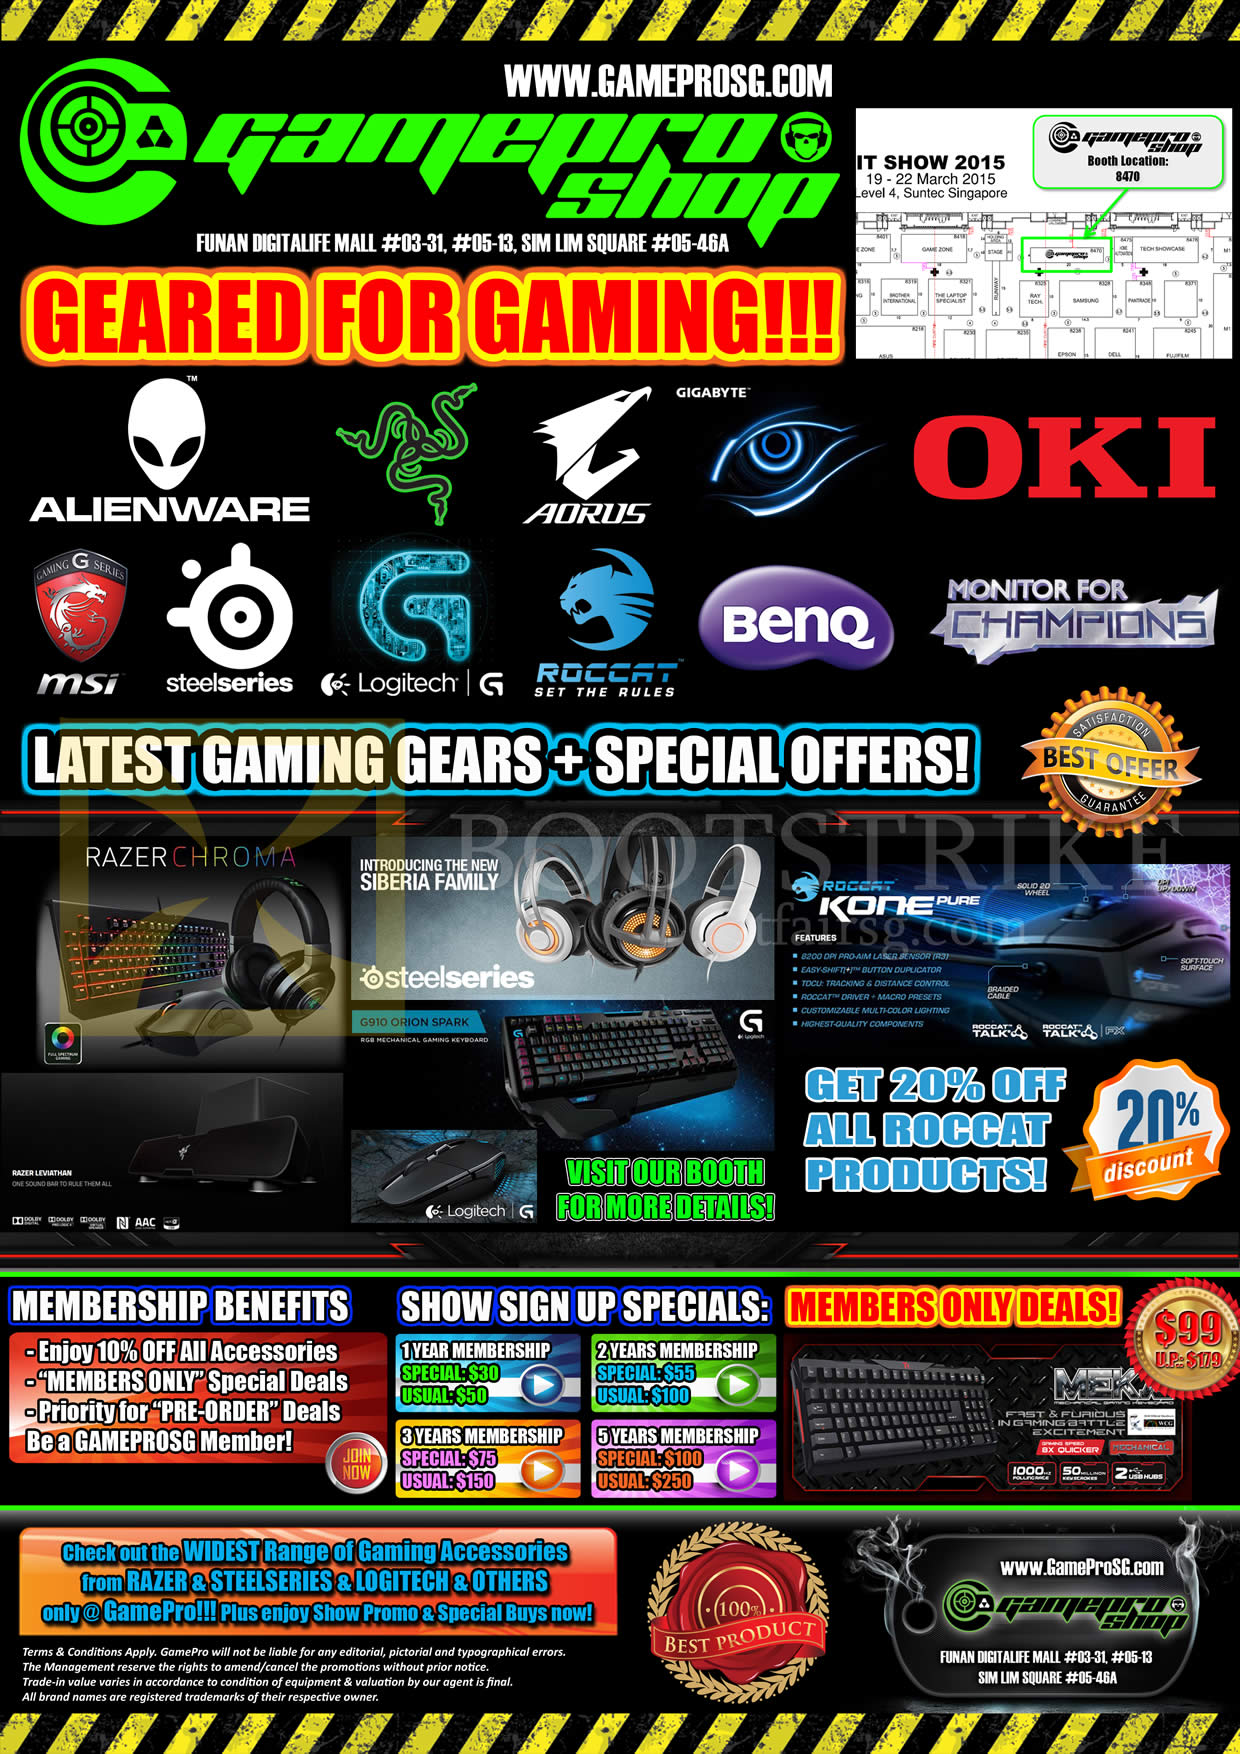 IT SHOW 2015 price list image brochure of GamePro Shop Gaming Gears, Sign Up Specials, Participating Brands